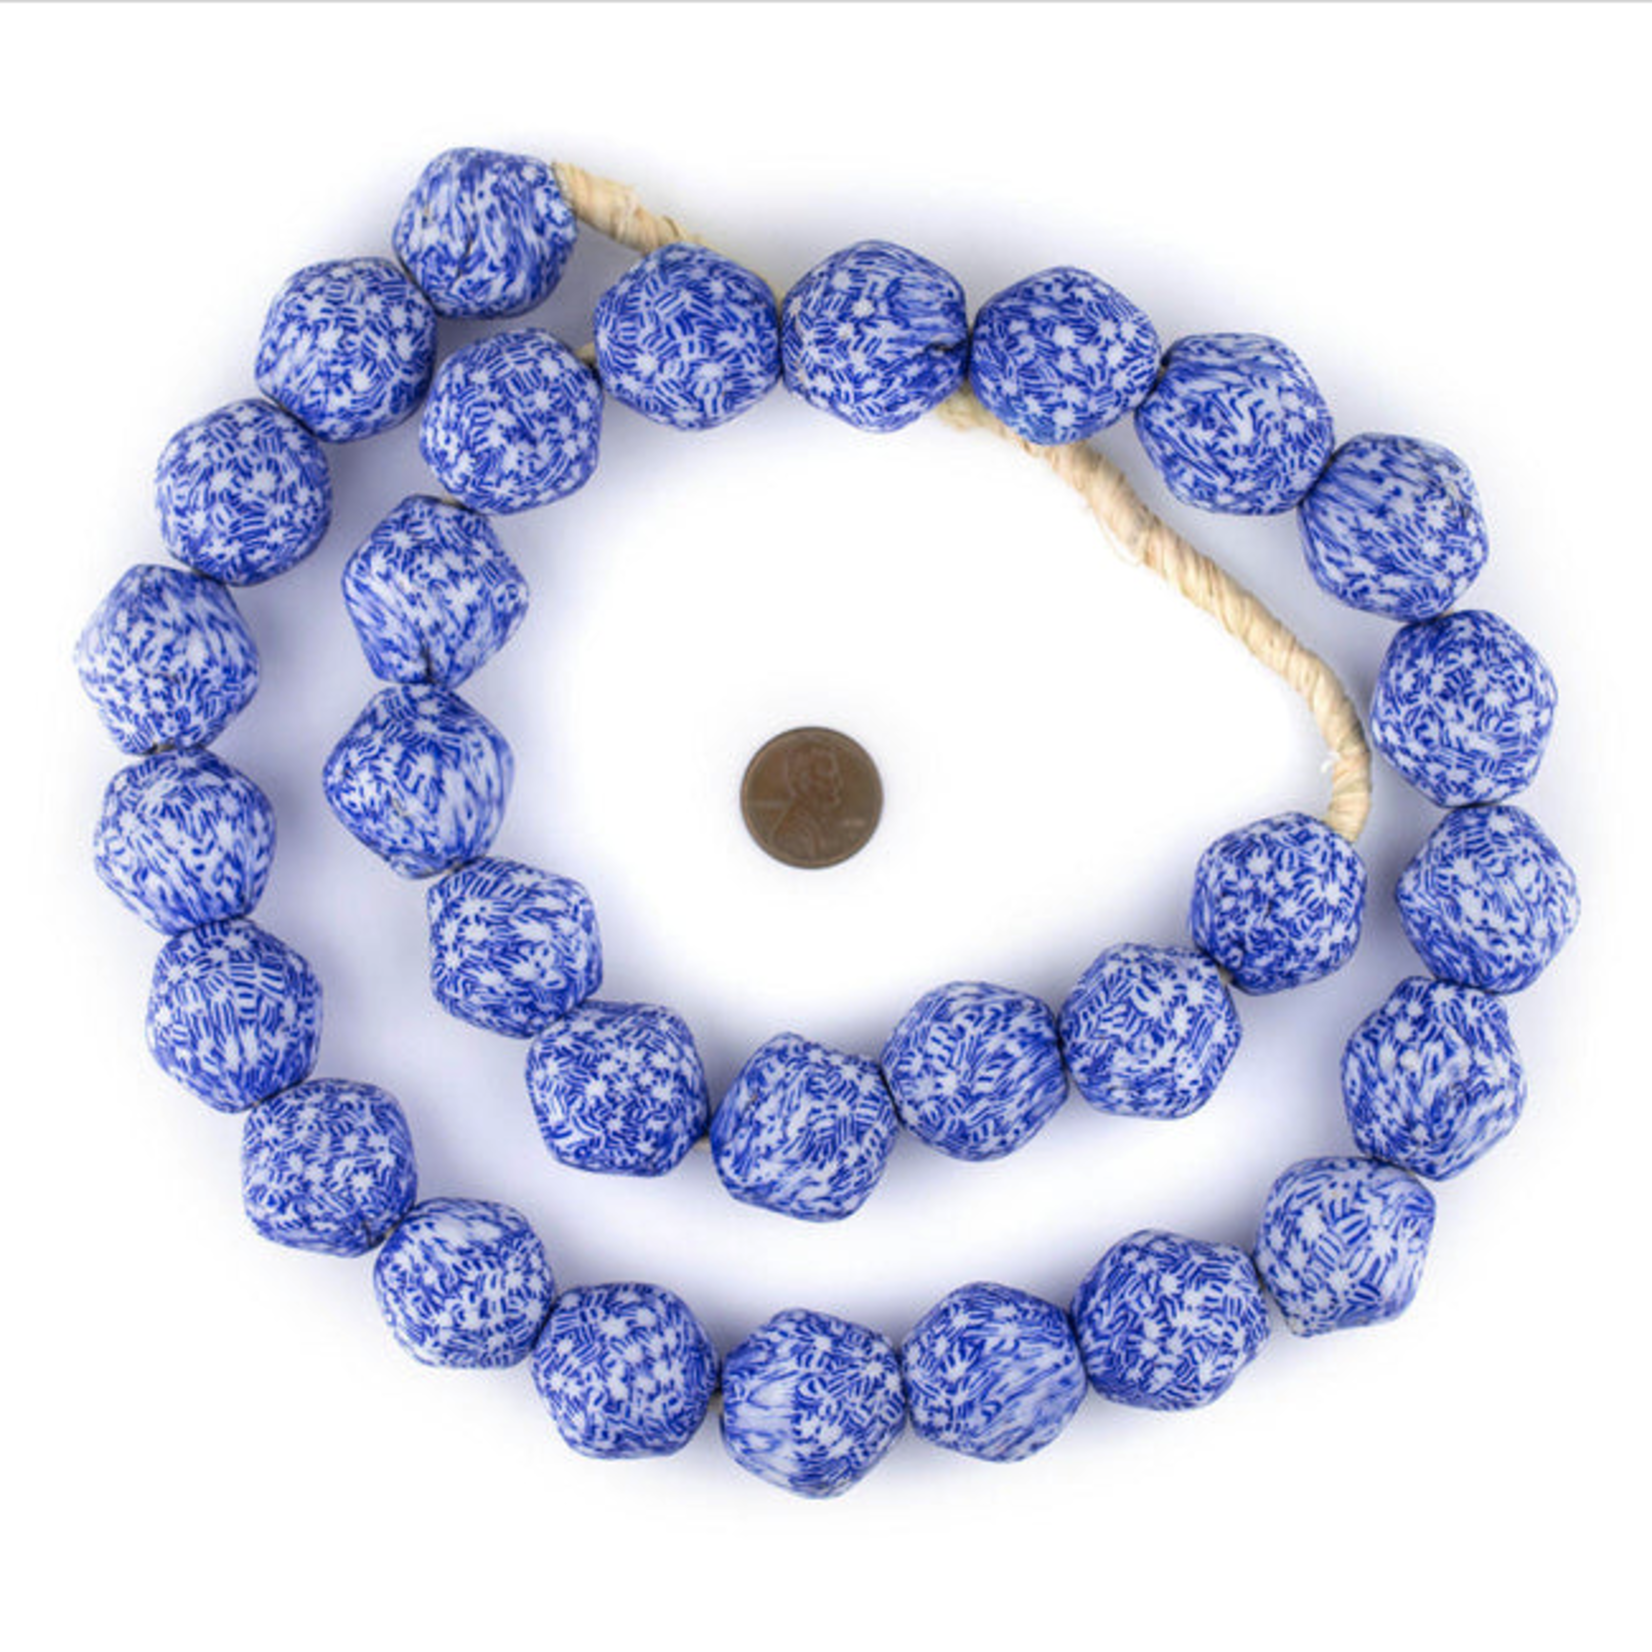 Outside The Box 34" Blue & White Fused Bicone Recycled 24mm Glass Beads